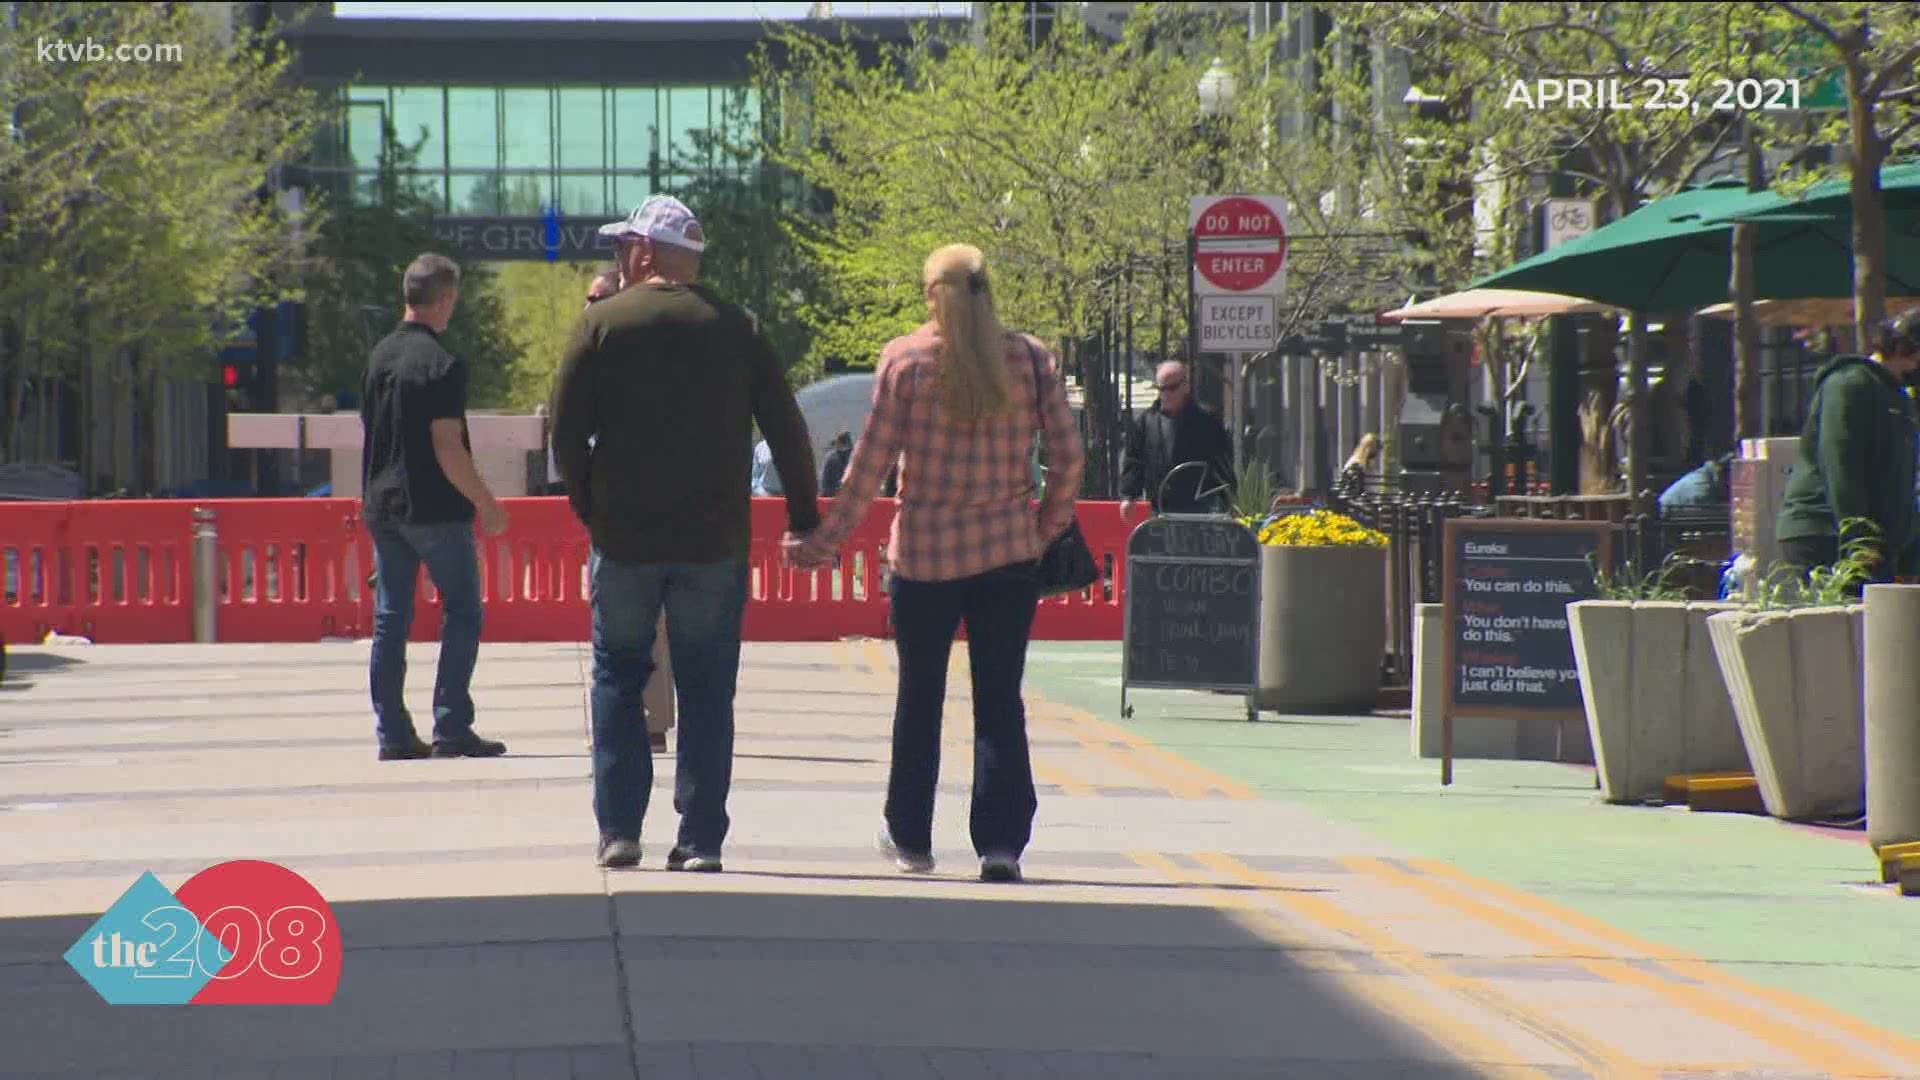 A year after visiting downtown Boise became a ghost town due to the pandemic, The 208 went to the heart of the capital city and found a much different scene.